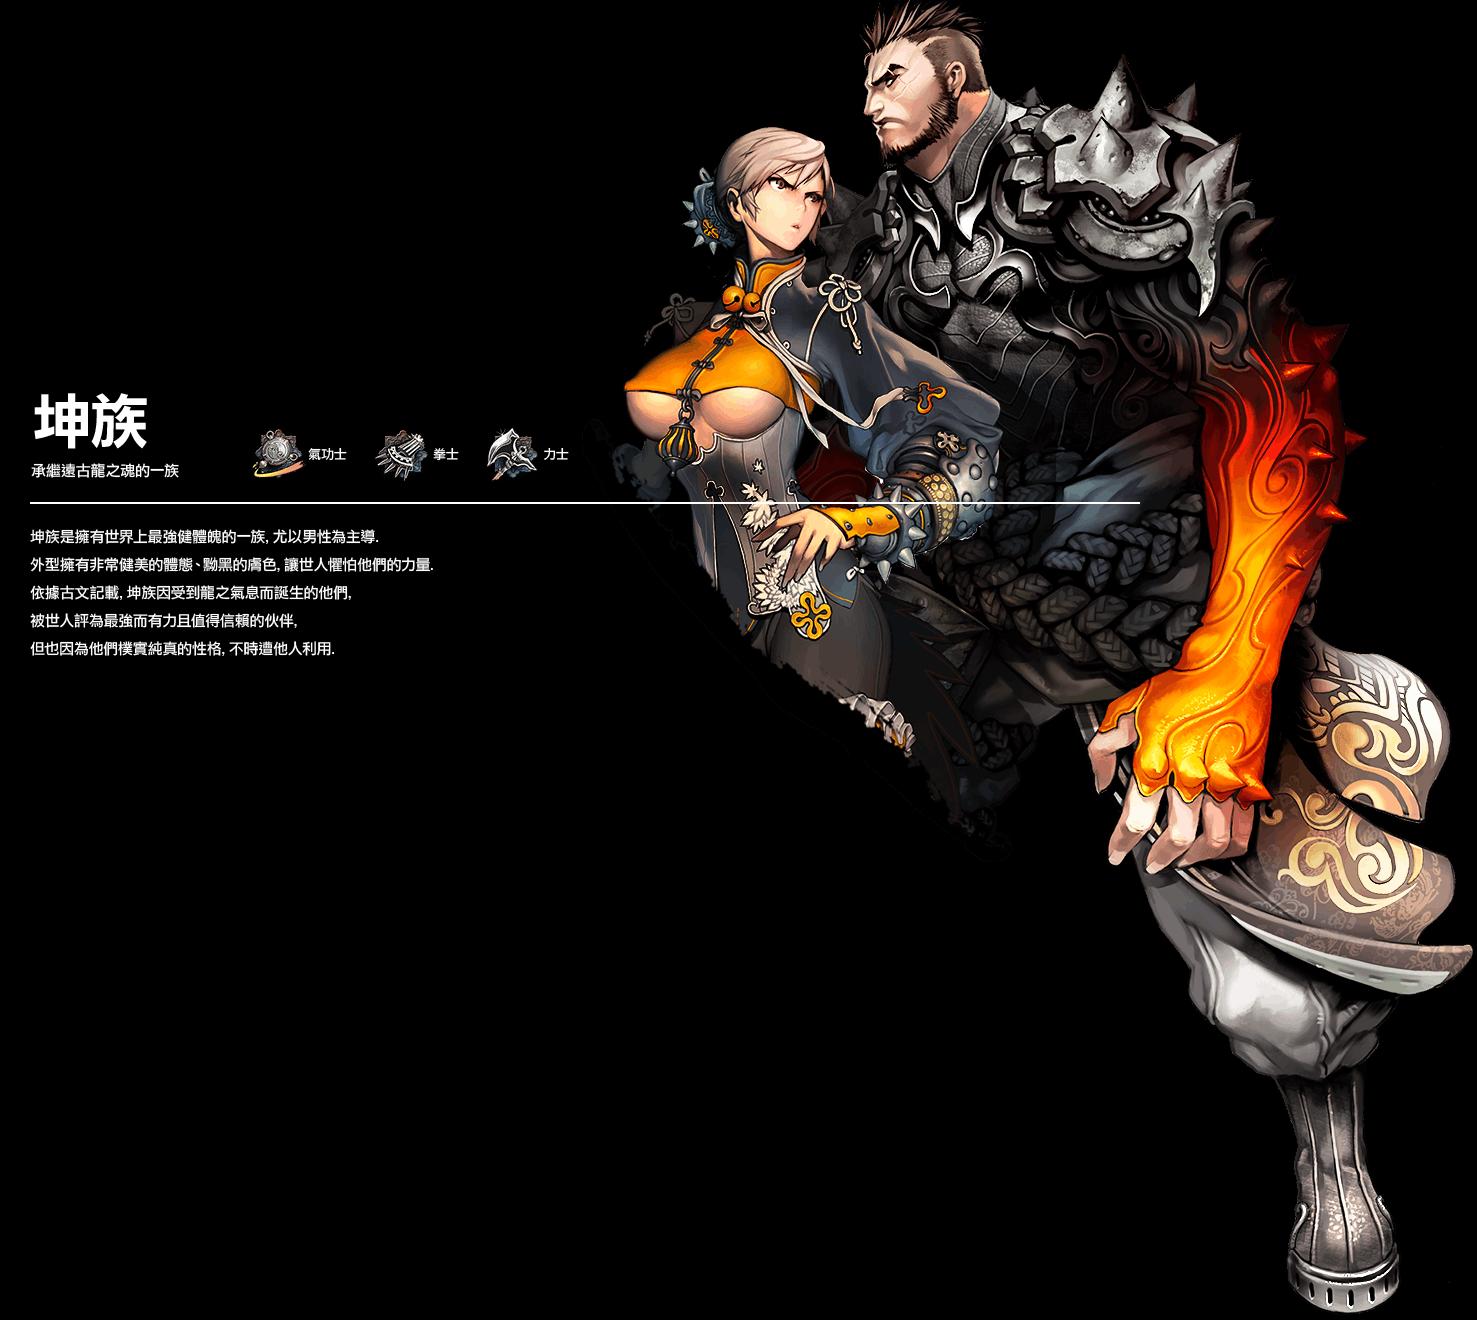 &#91;OFFICIAL&#93; Blade &amp; Soul Taiwan Server